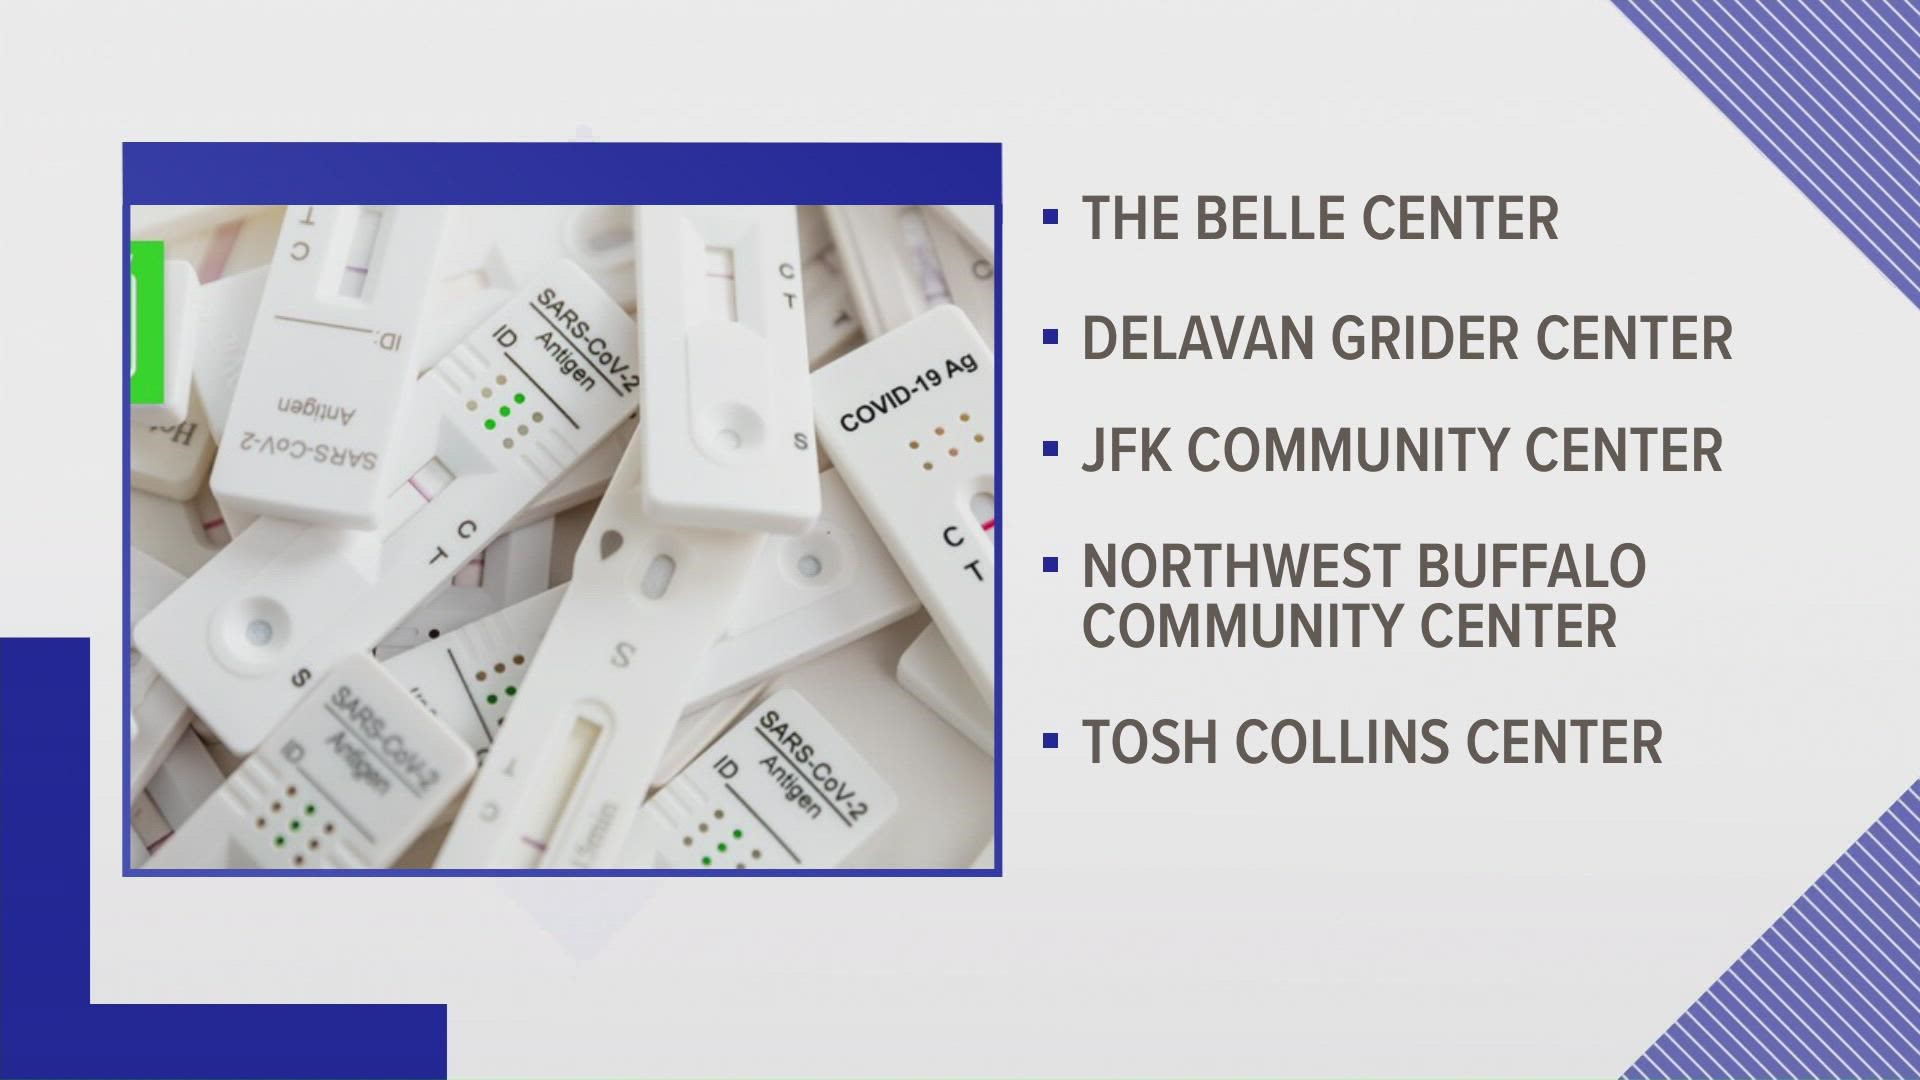 945 ordlyd etage City of Buffalo to give out 11,000 COVID test kits at 5 locations Tuesday |  wgrz.com